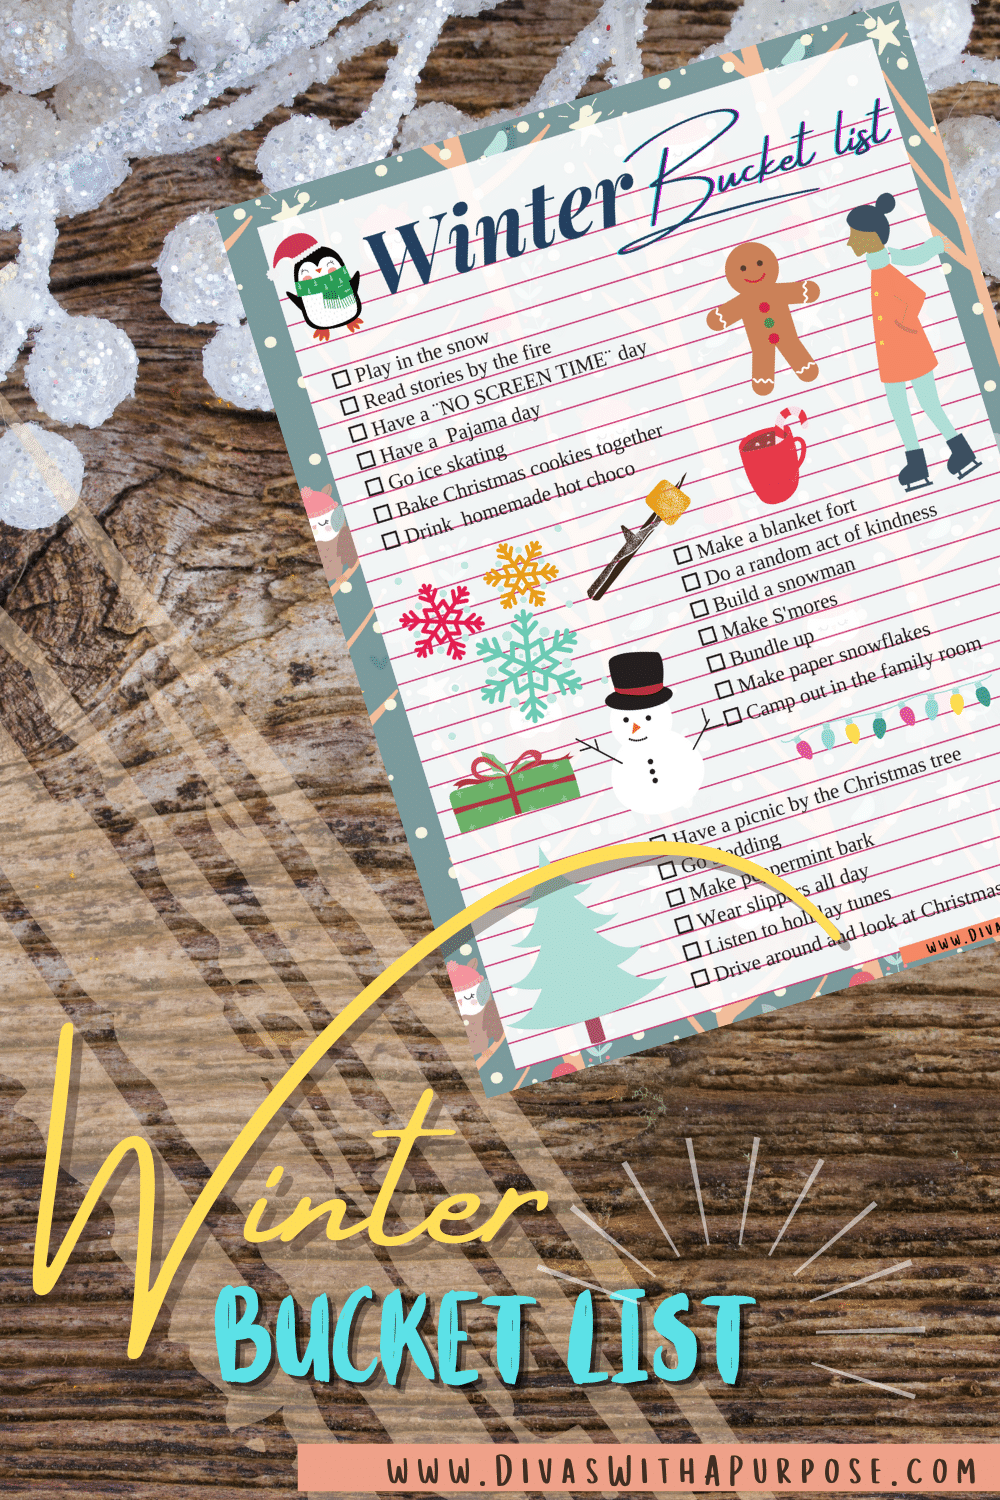 Here are fun ideas to help you plan out your family's winter bucket list. #winterbucketlist #familytime #bucketlist